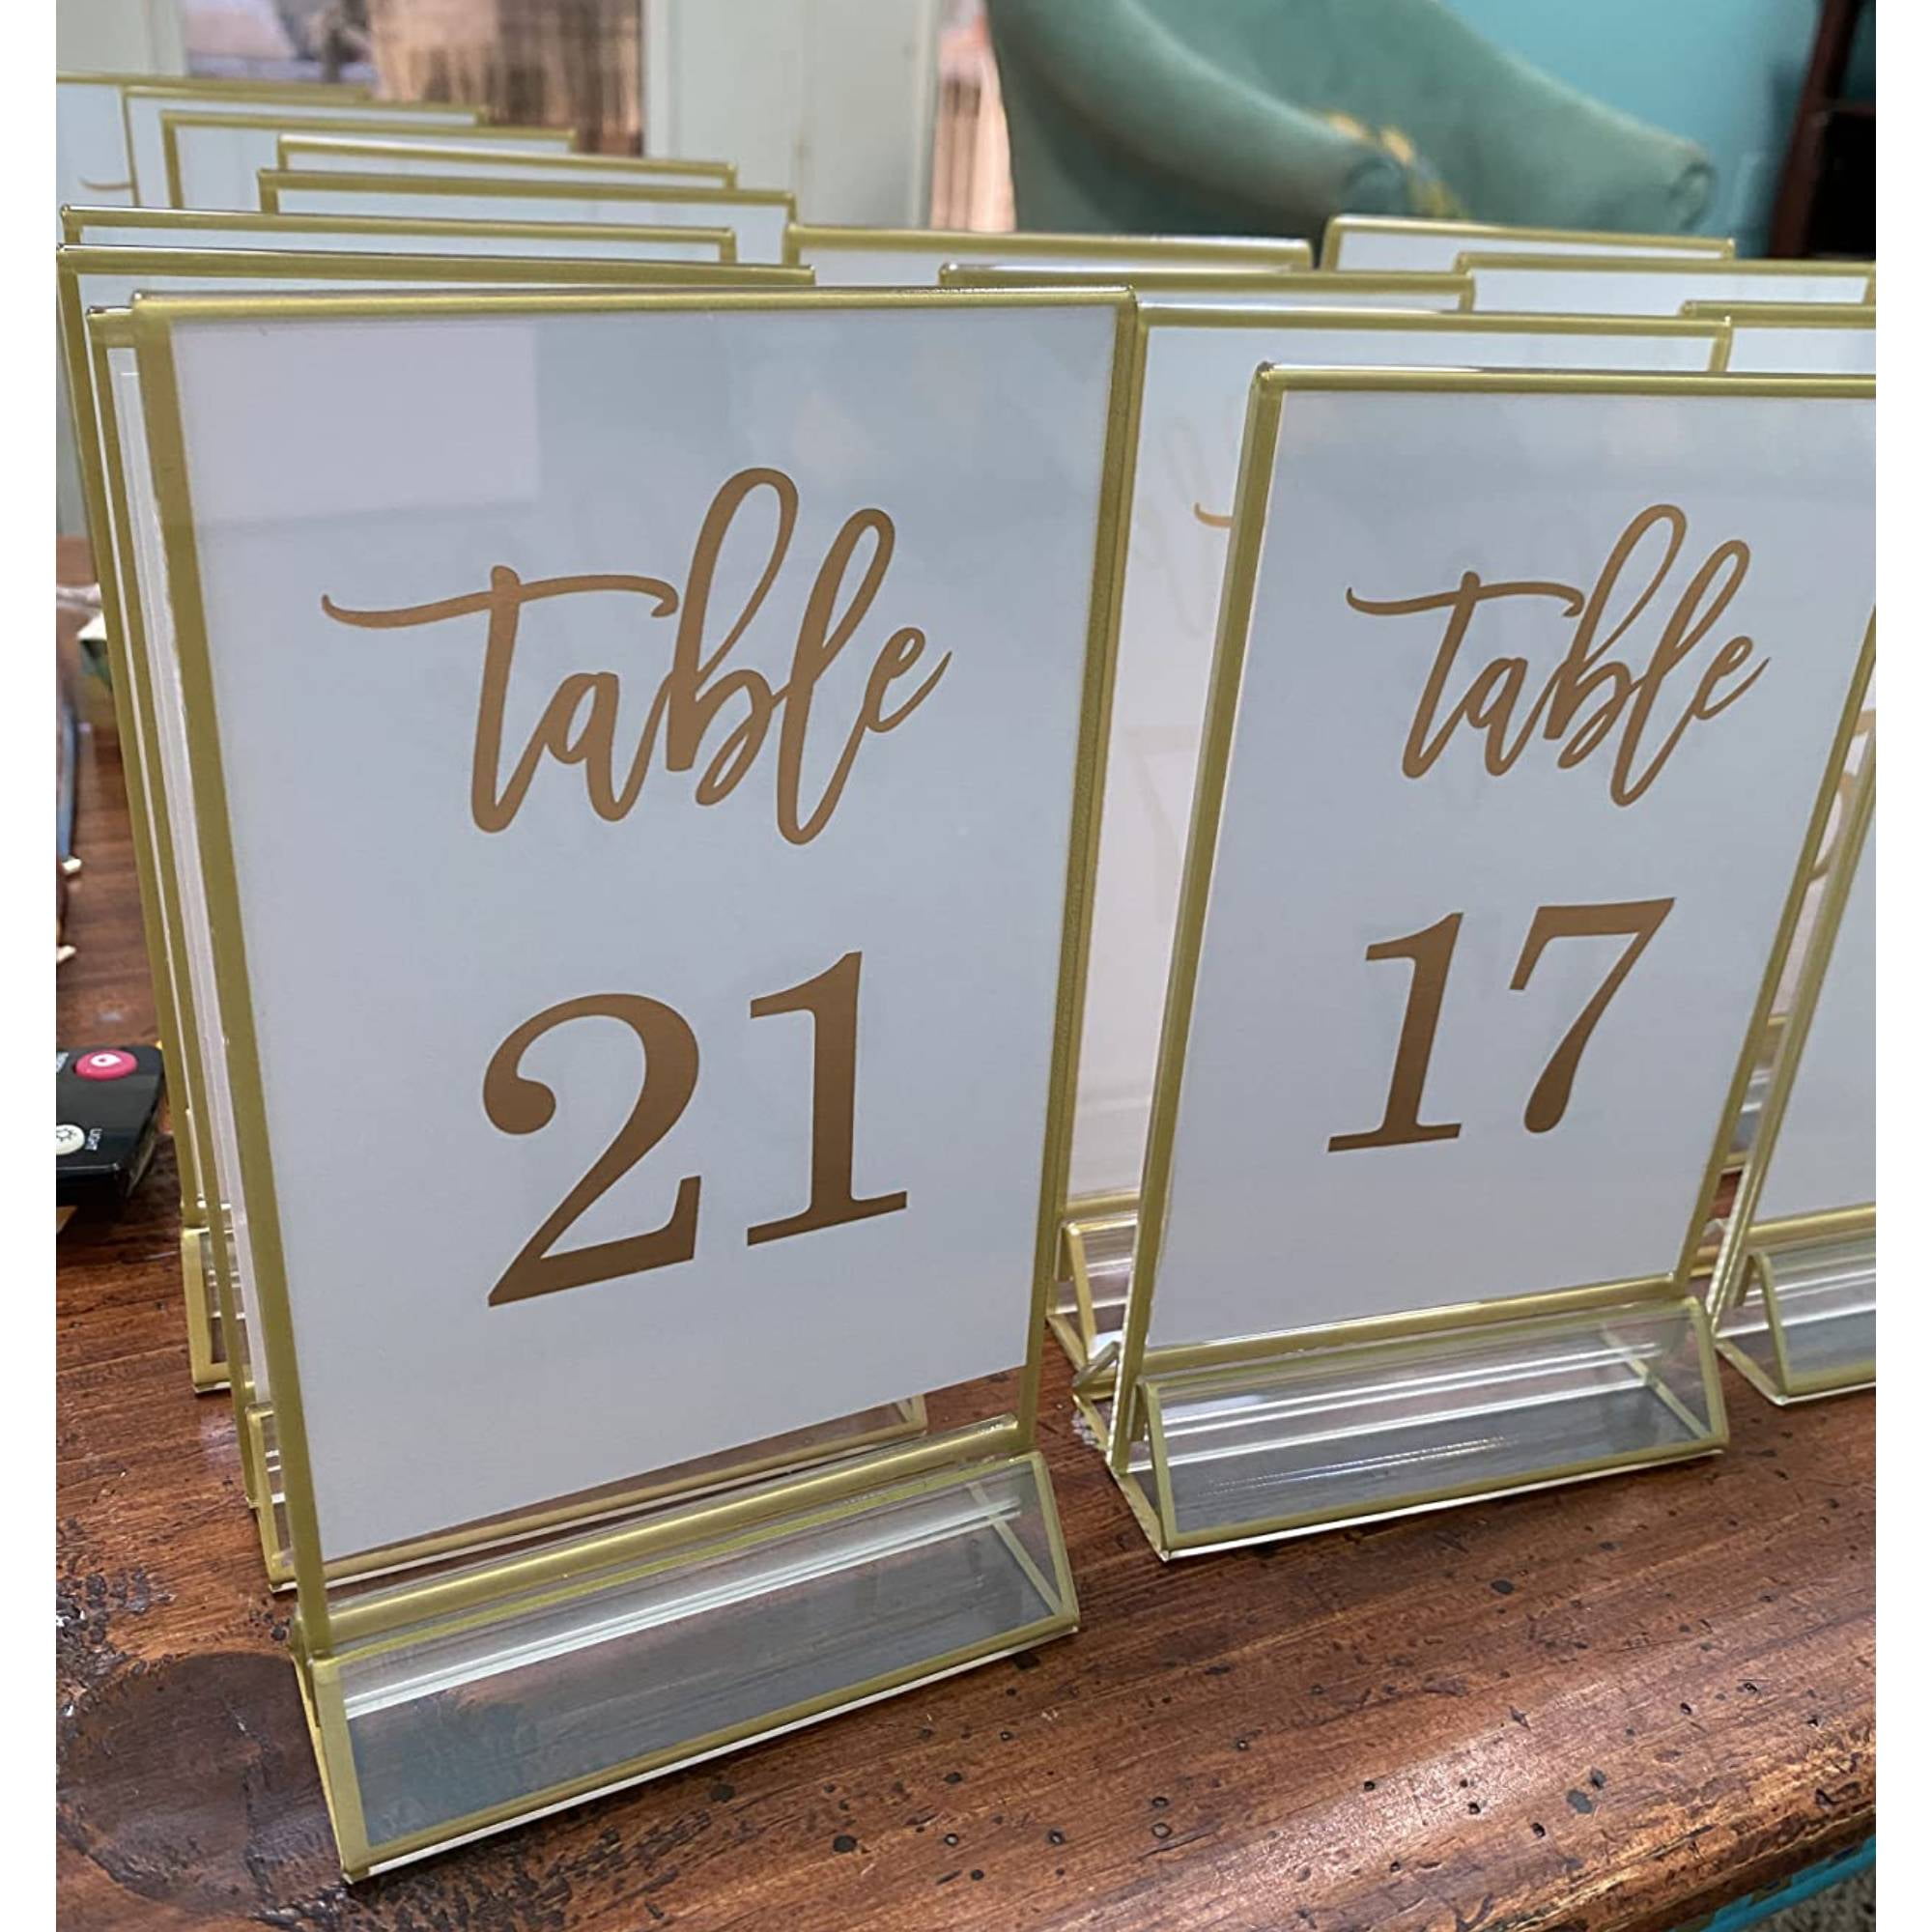 TEHAUX Acrylic V-shaped Conference Sign Wedding Invitation Acrylic Sign  Stand Acrylic Sign Holder Reserved Signs for Meeting Table Number Holders